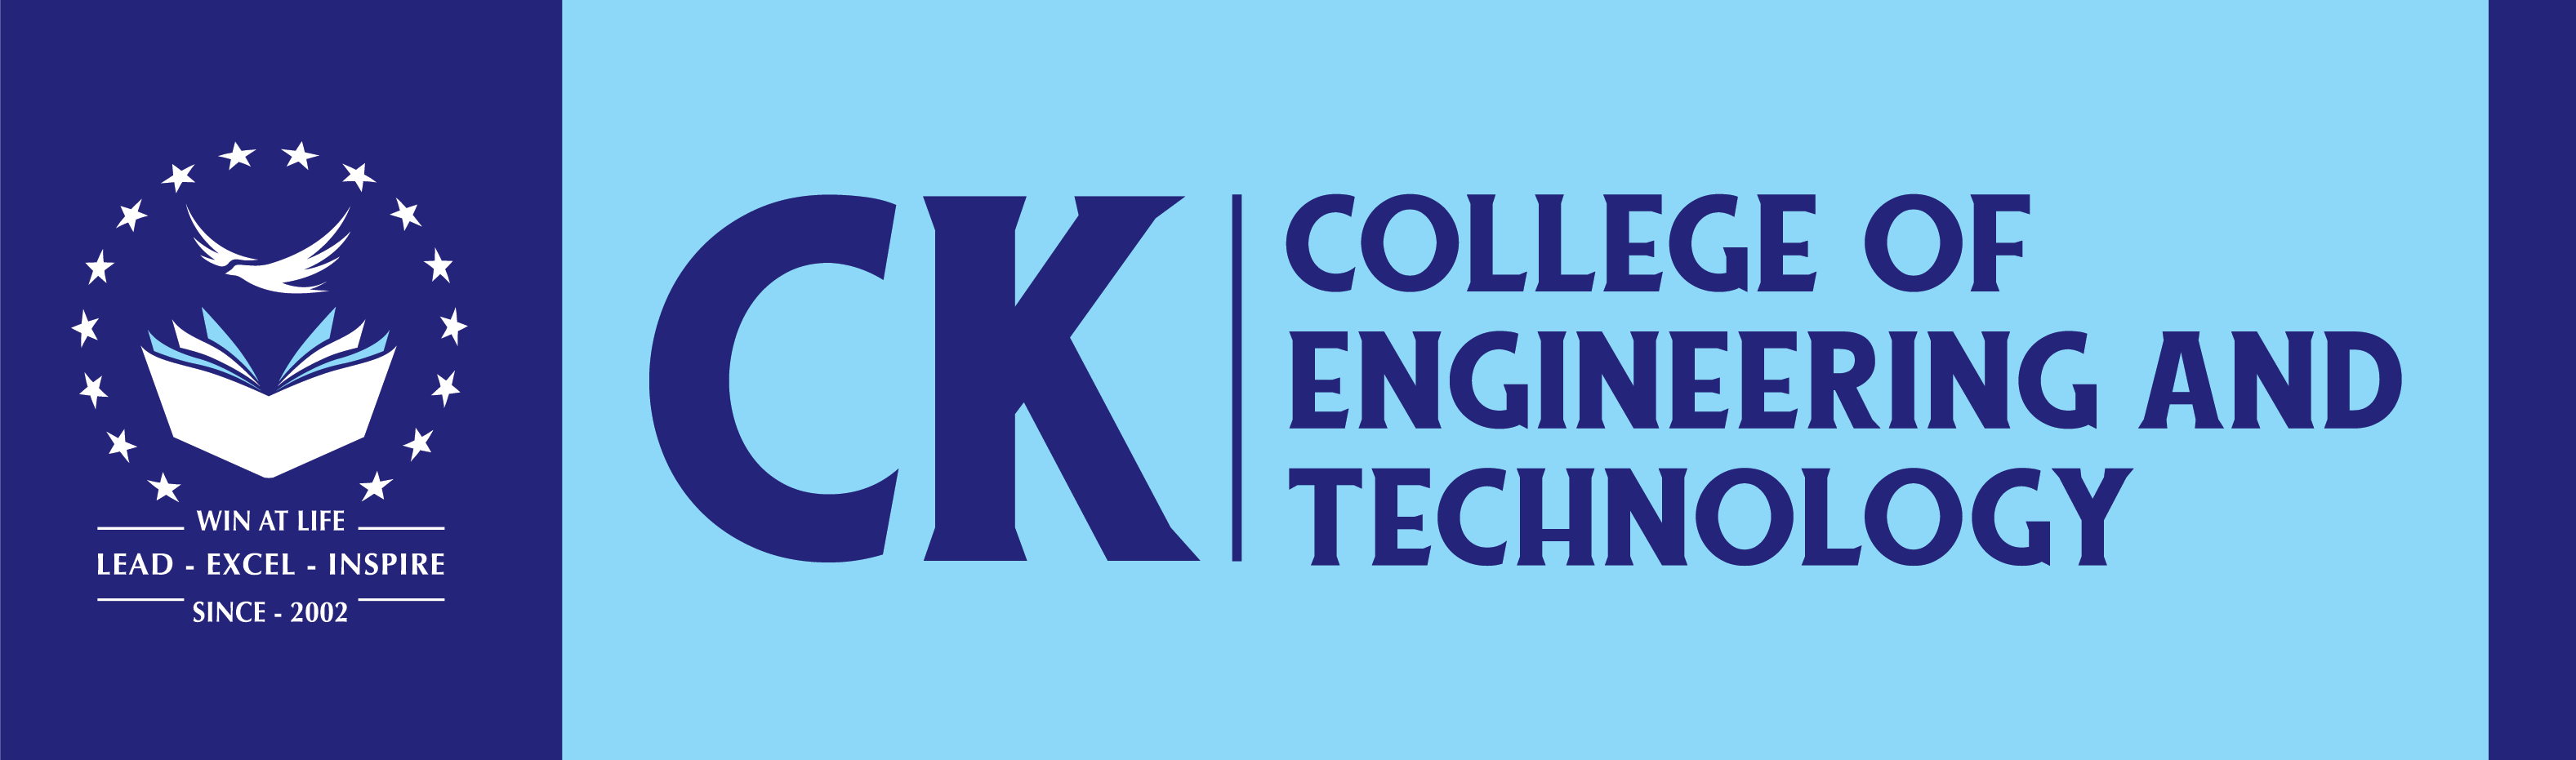 CK College of Engineering and Technology